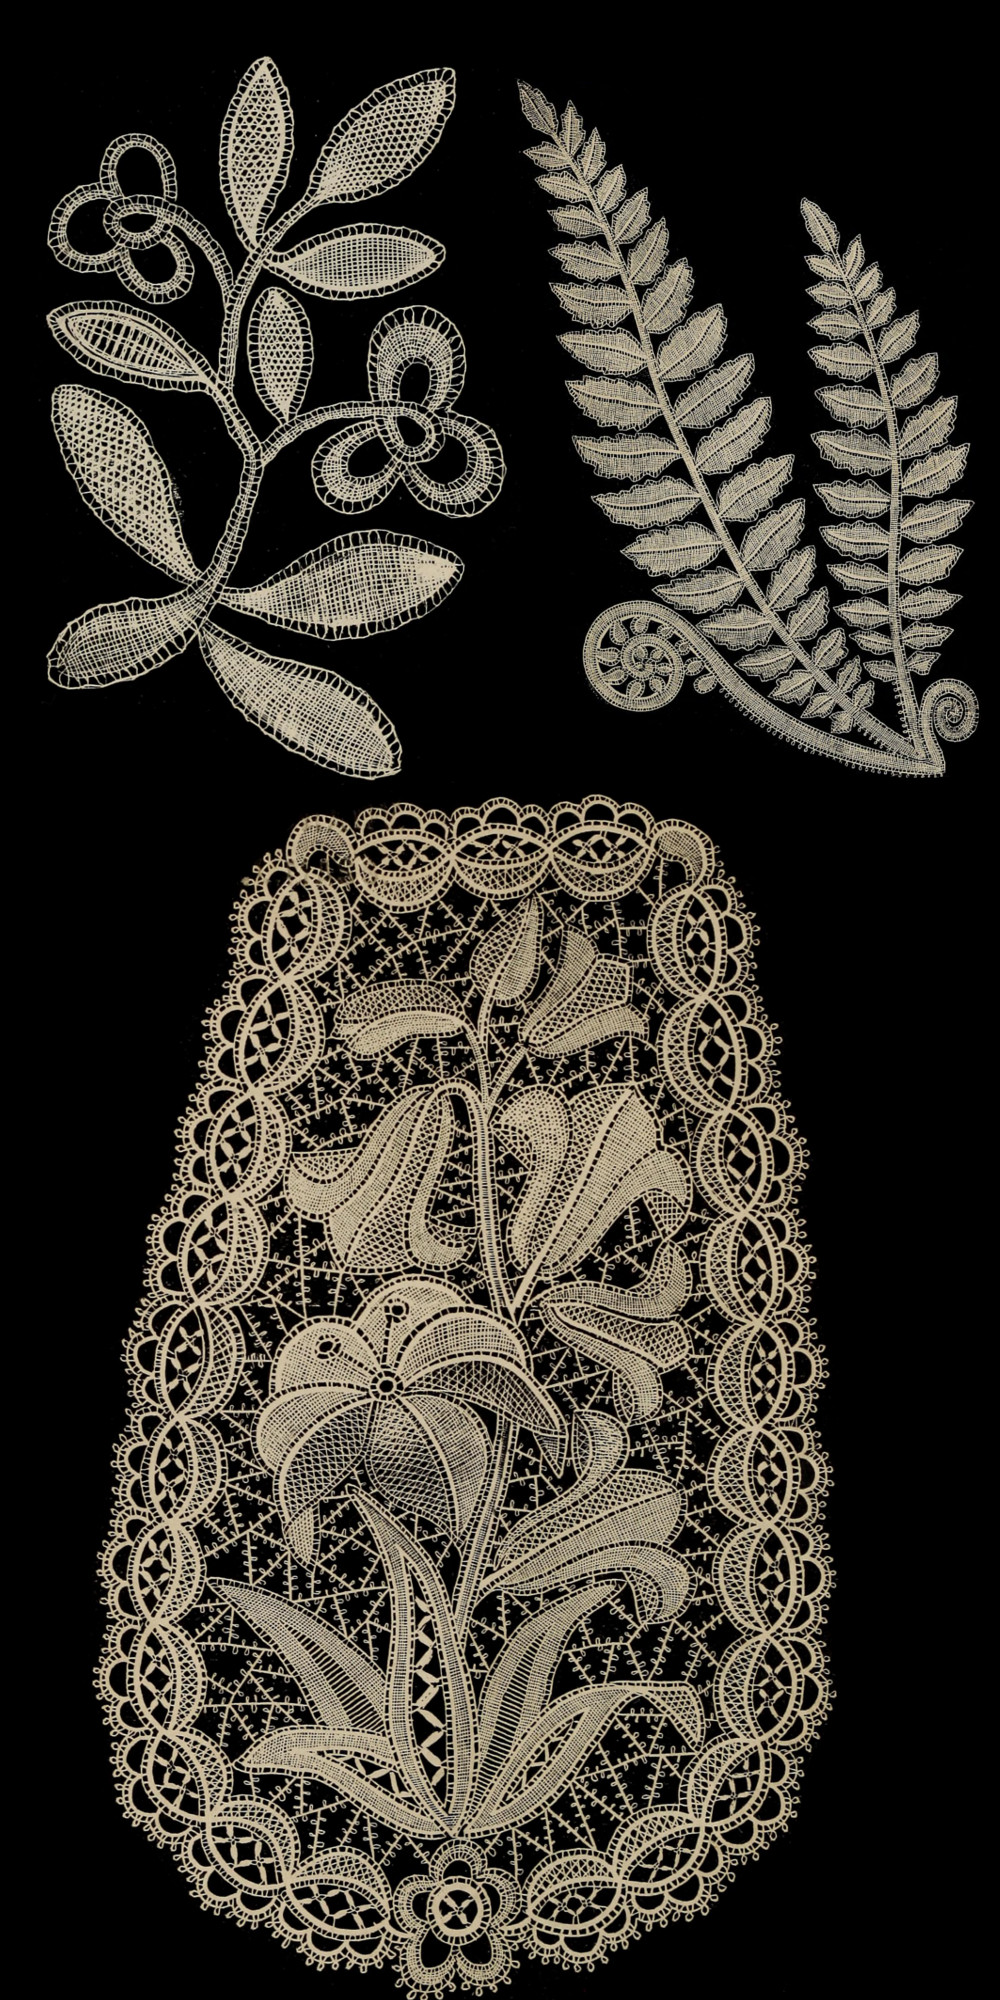 Examples of Honiton Lace from Honiton, Devon